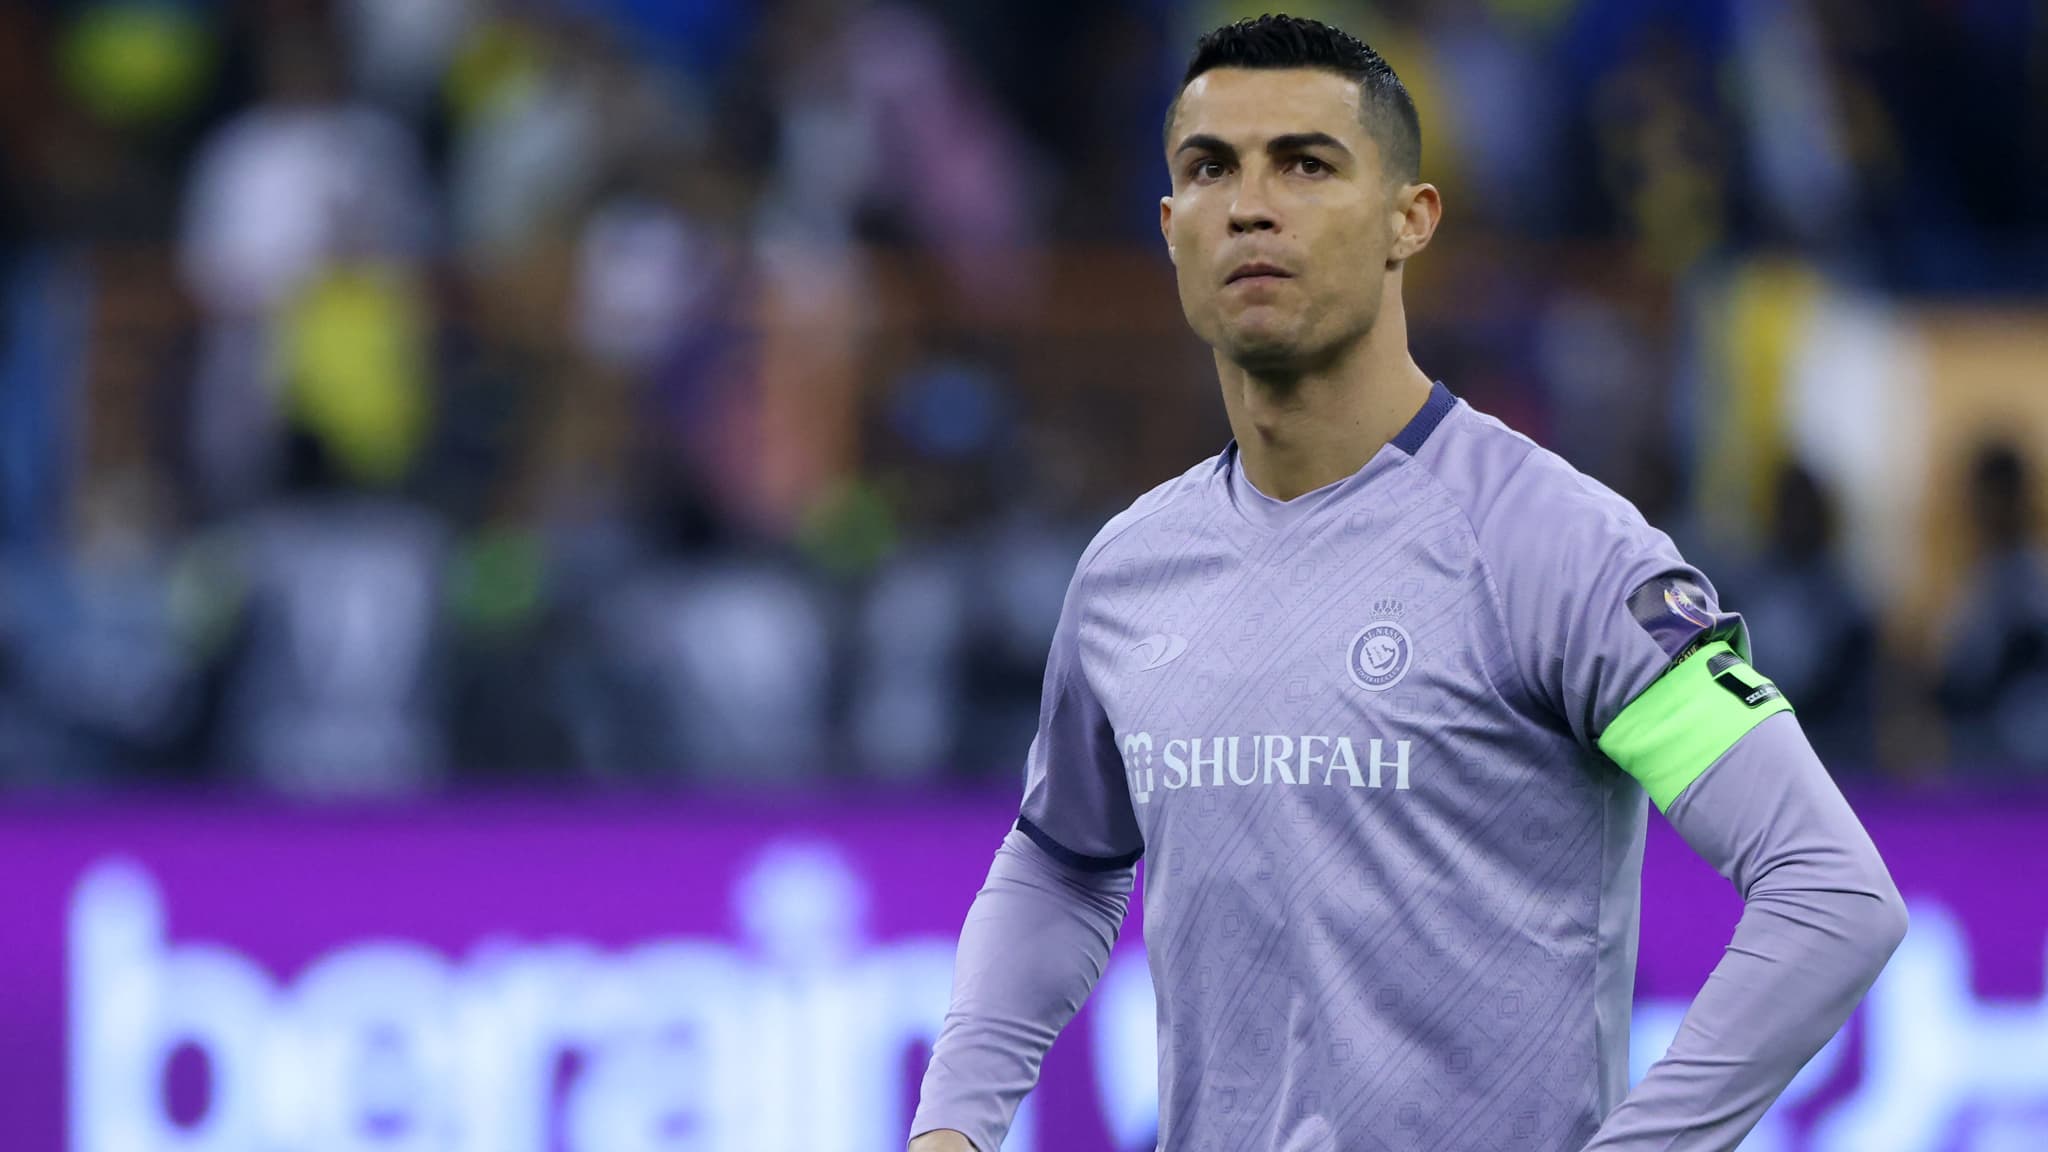 Georgina Rodriguez brings back the fact that Cristiano Ronaldo has not moved to Atlético